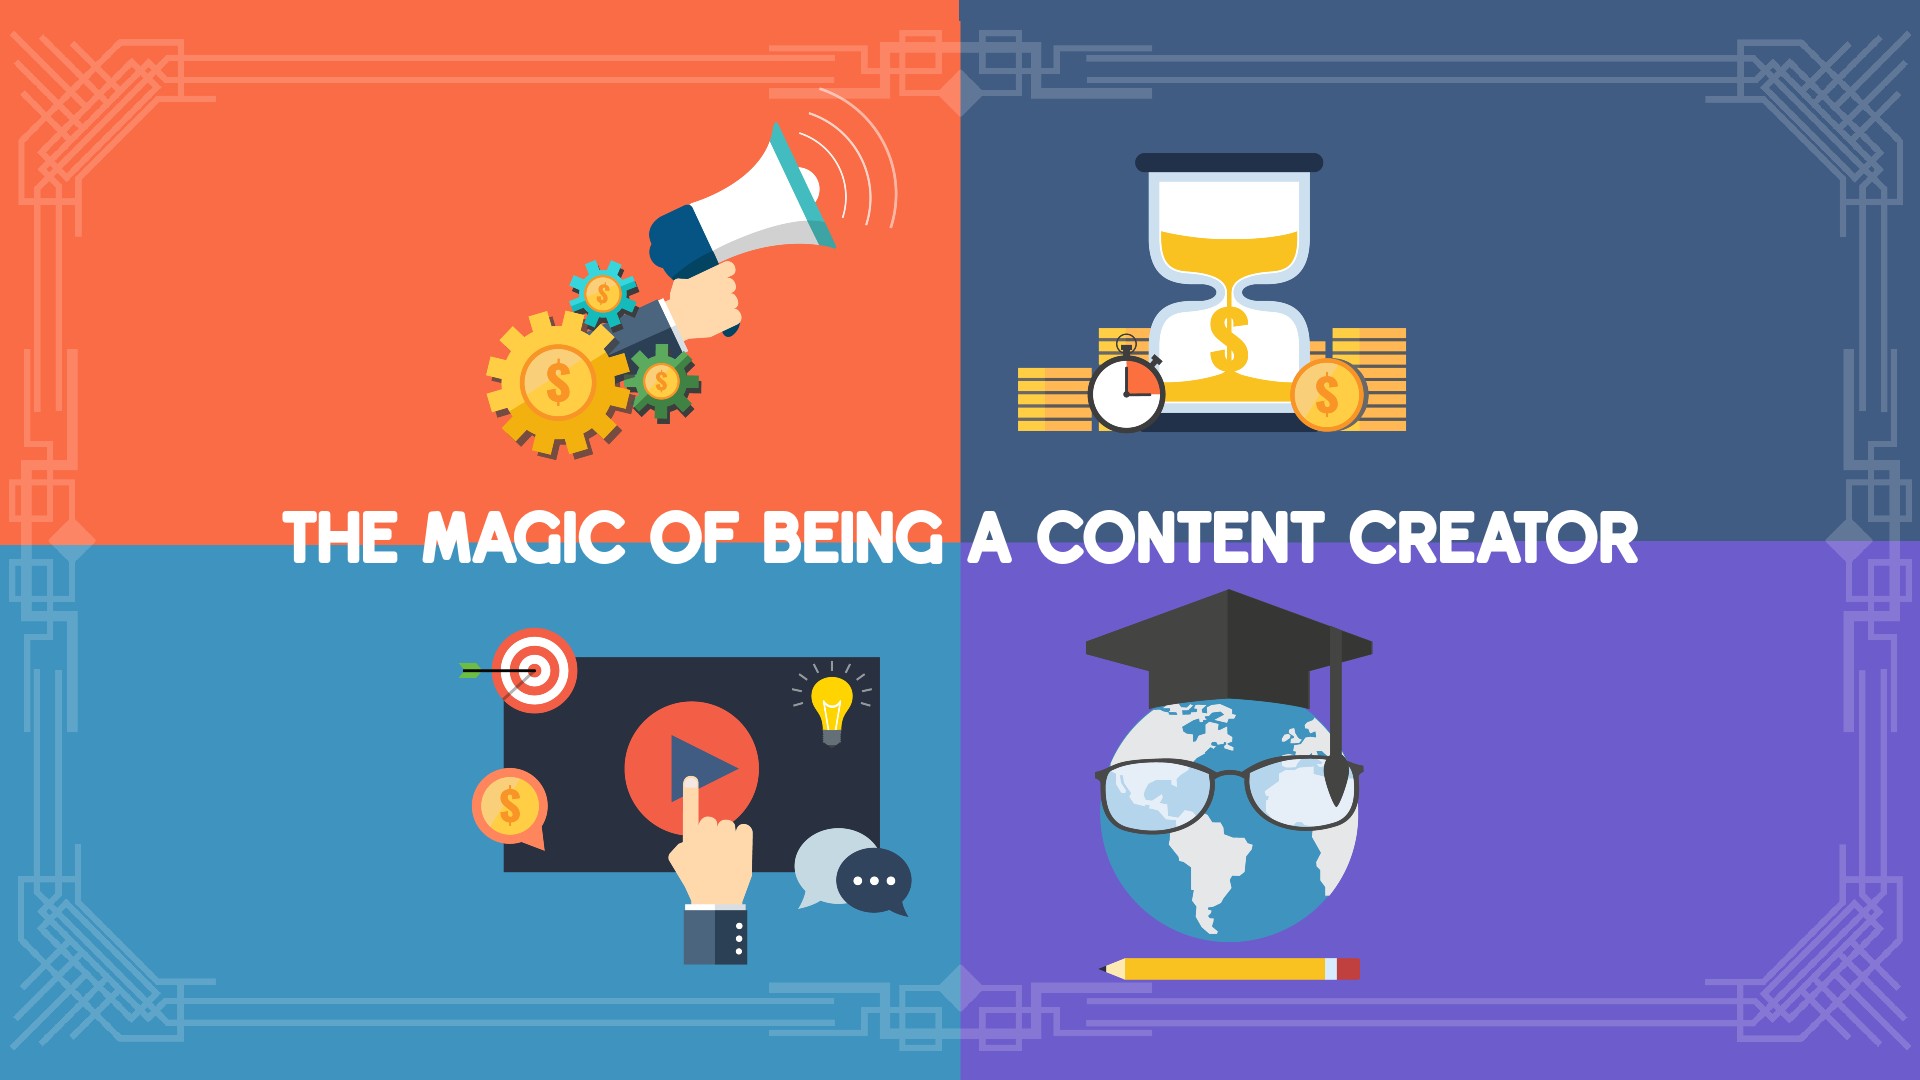 The Magic of Being a Content Creator